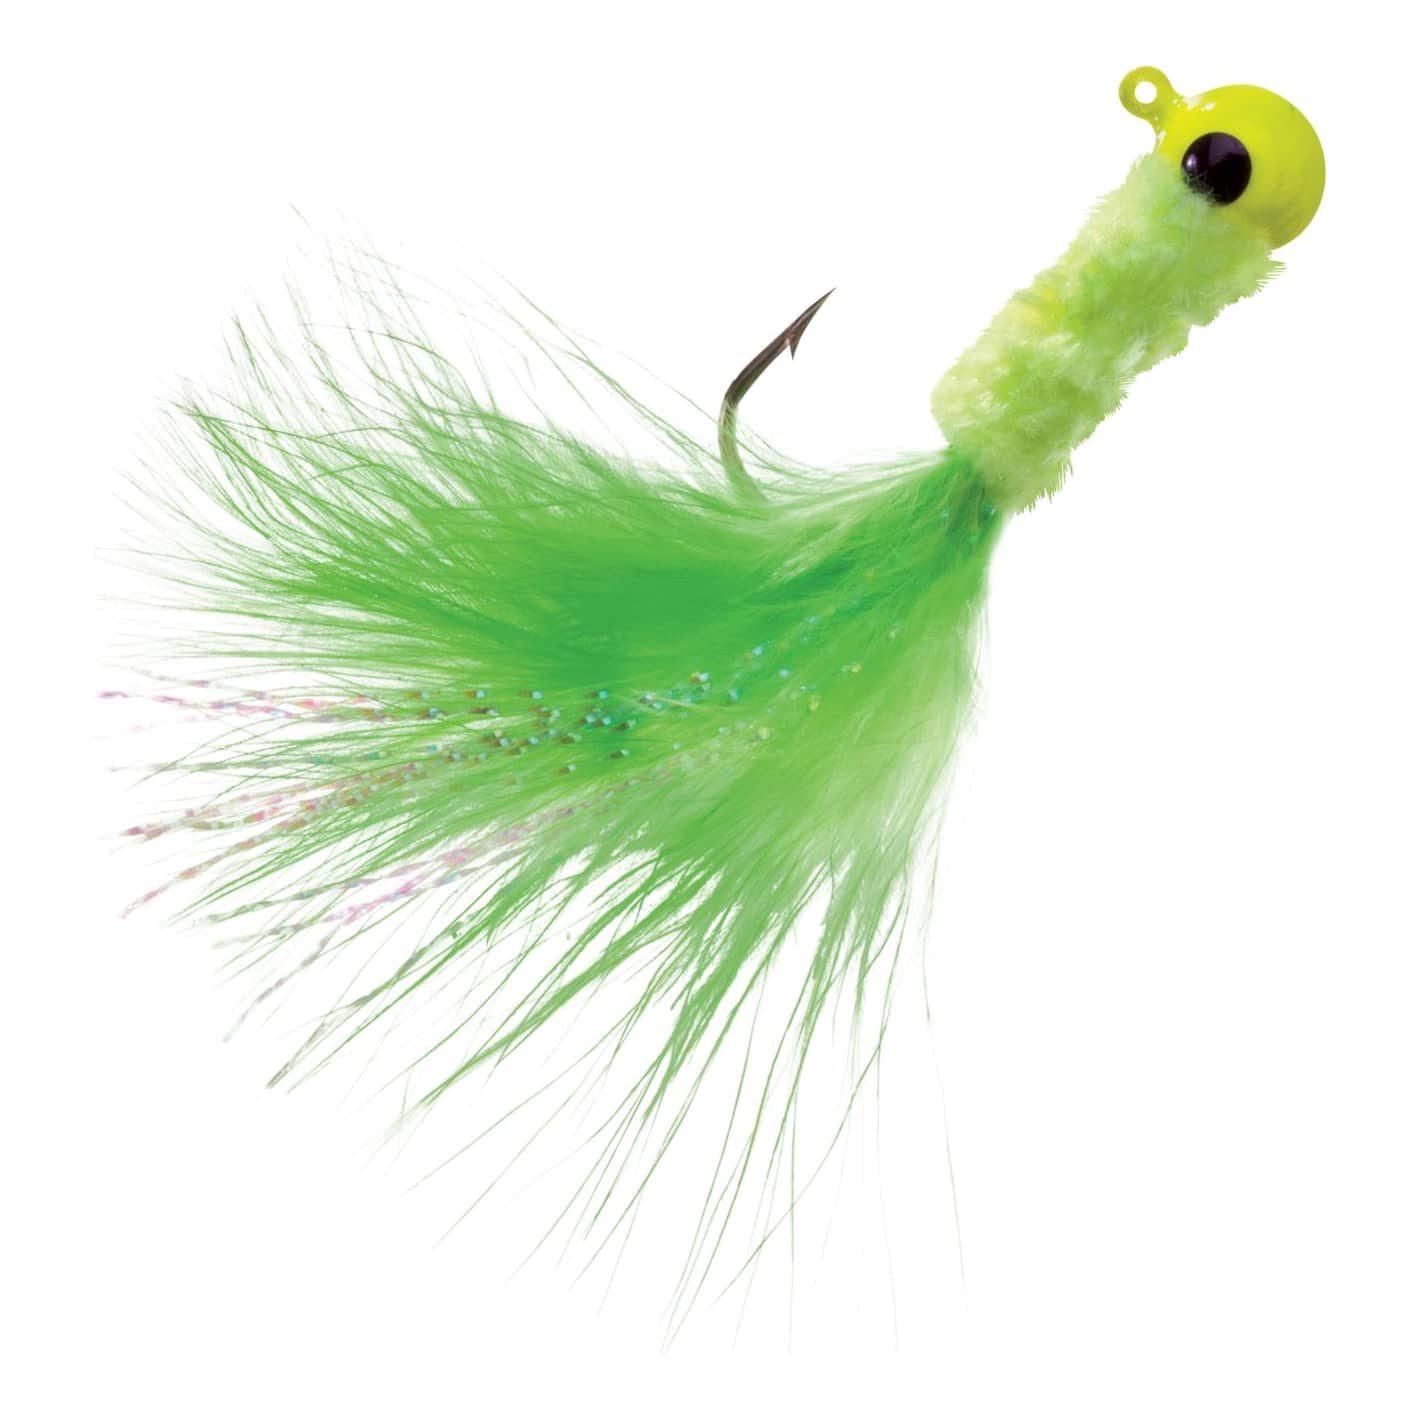 Bass Pro Shops® Marabou Tinsel Crappie Jig - Chartreuse